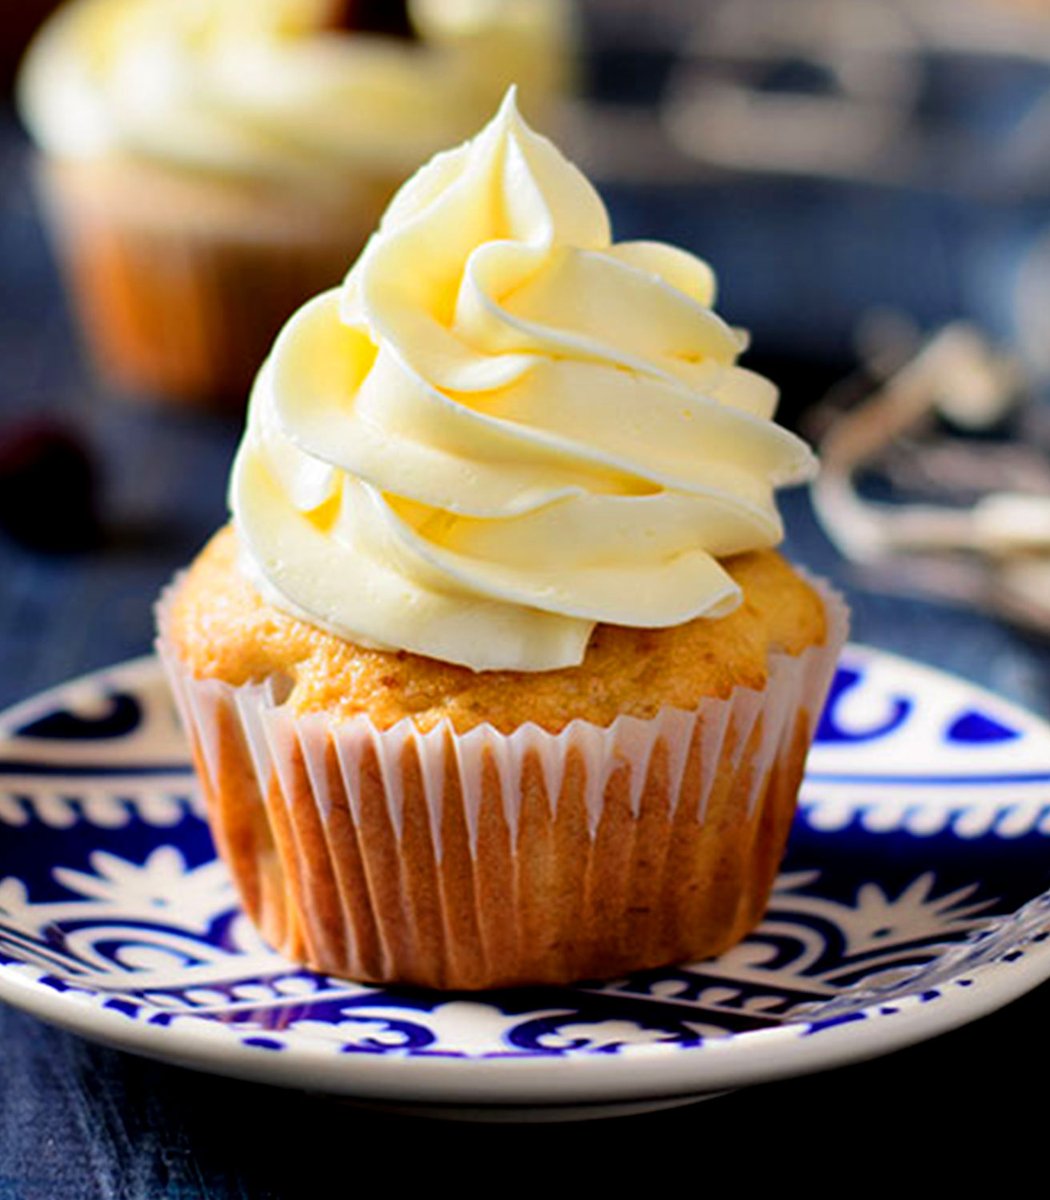 Nina is also practical, but c'mon. A cupcake needs frosting. What is the point of living if you're not going to enjoy the sweet parts, especially banana cupcakes with delicious buttercream.